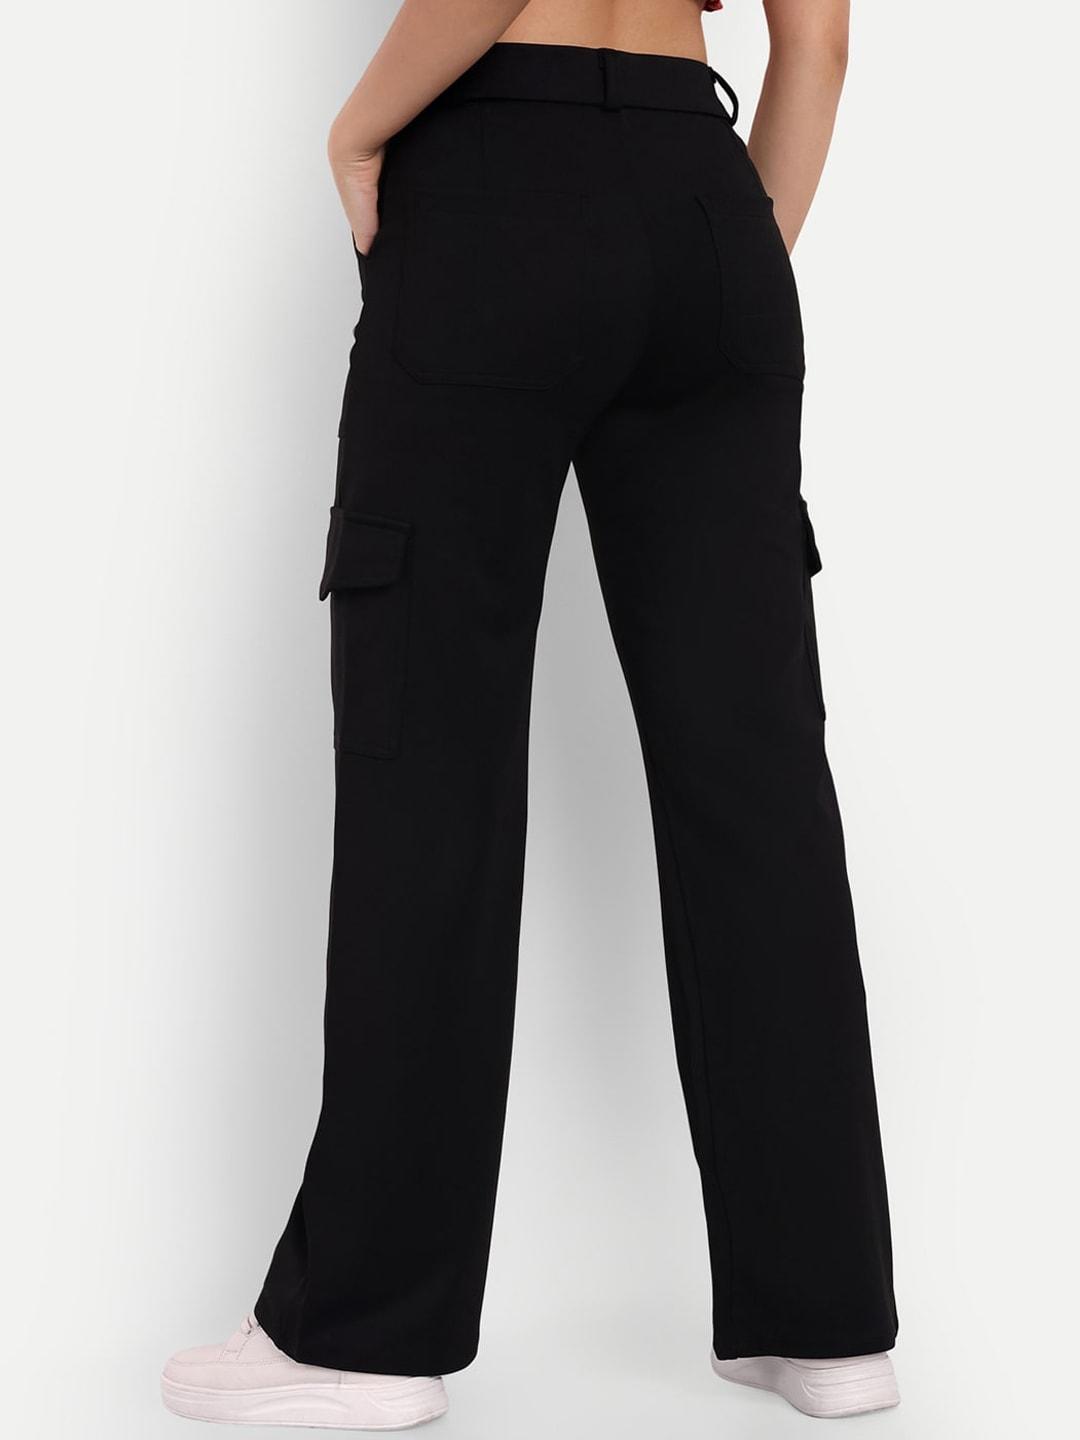 Next One Women Black Smart Loose Fit High-Rise Easy Wash Cargos Trousers